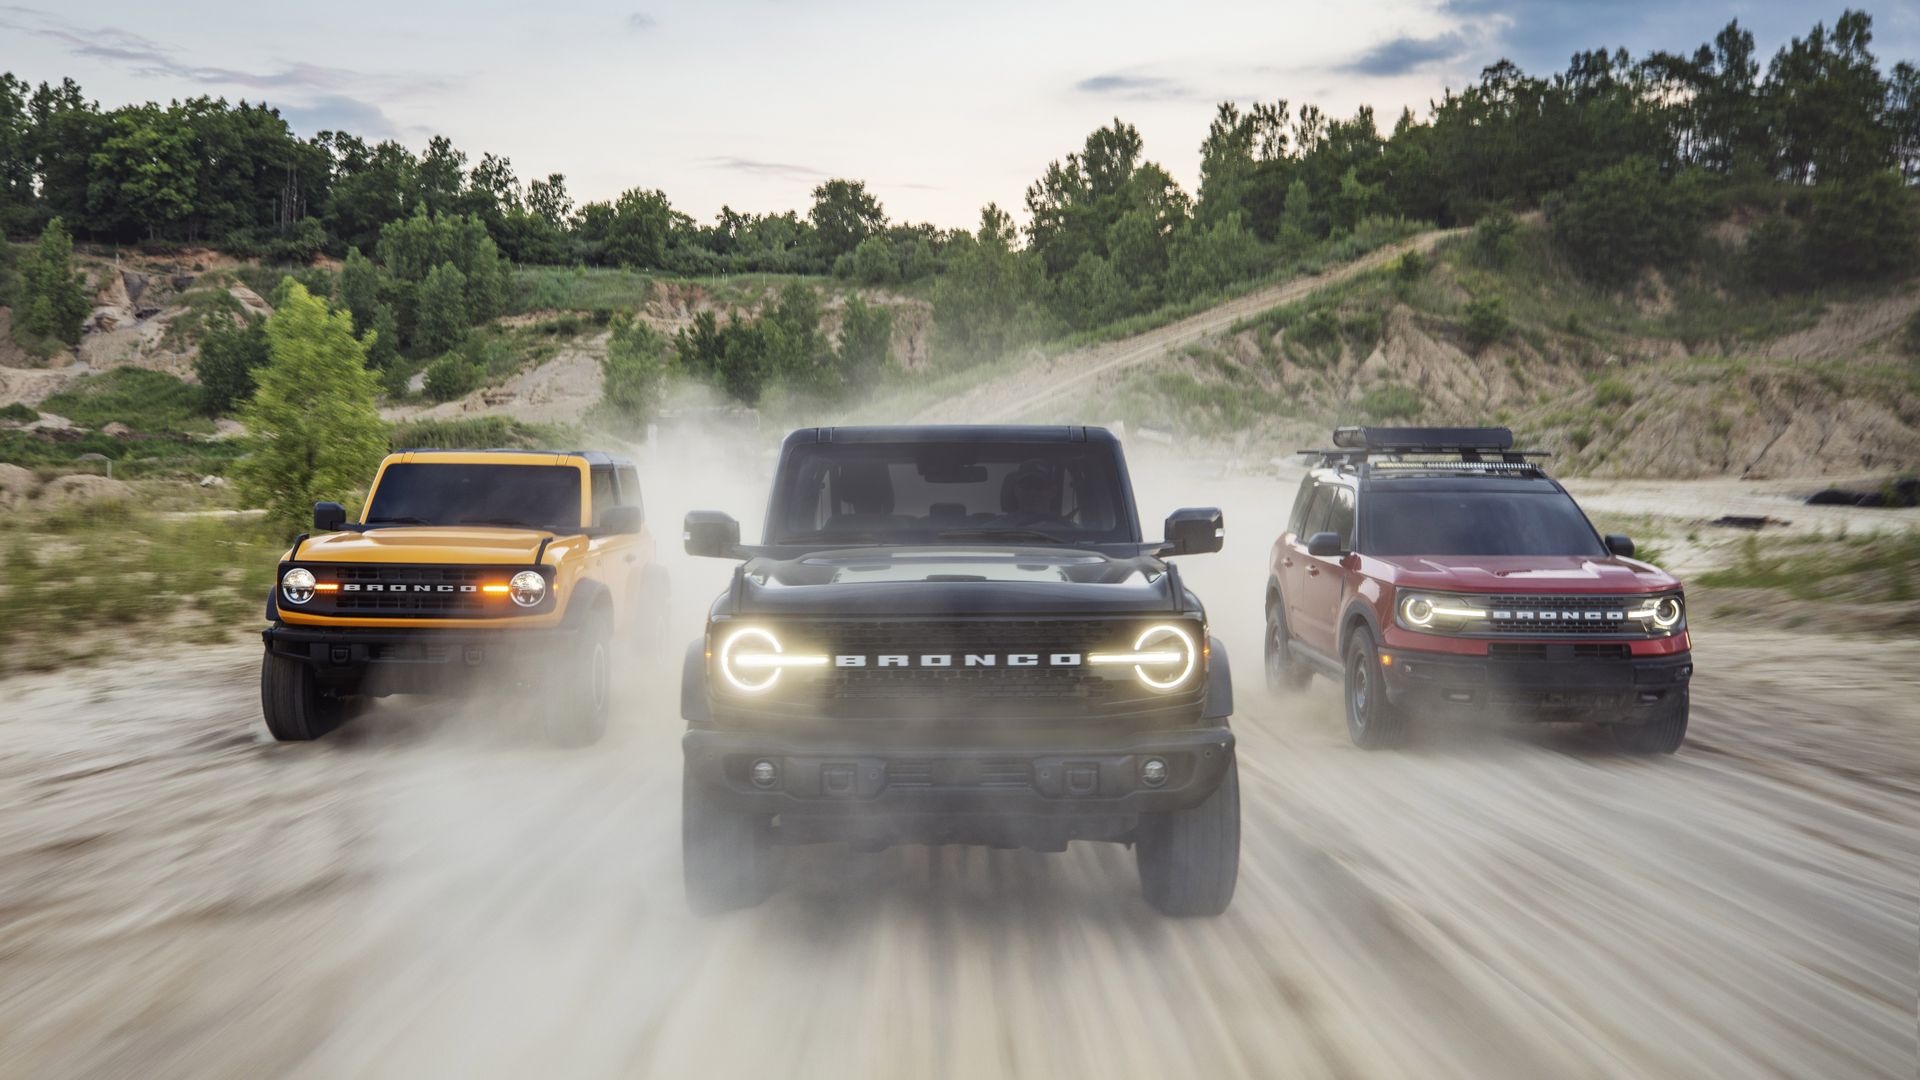 Image of 3 Ford Bronco SUVs driving together